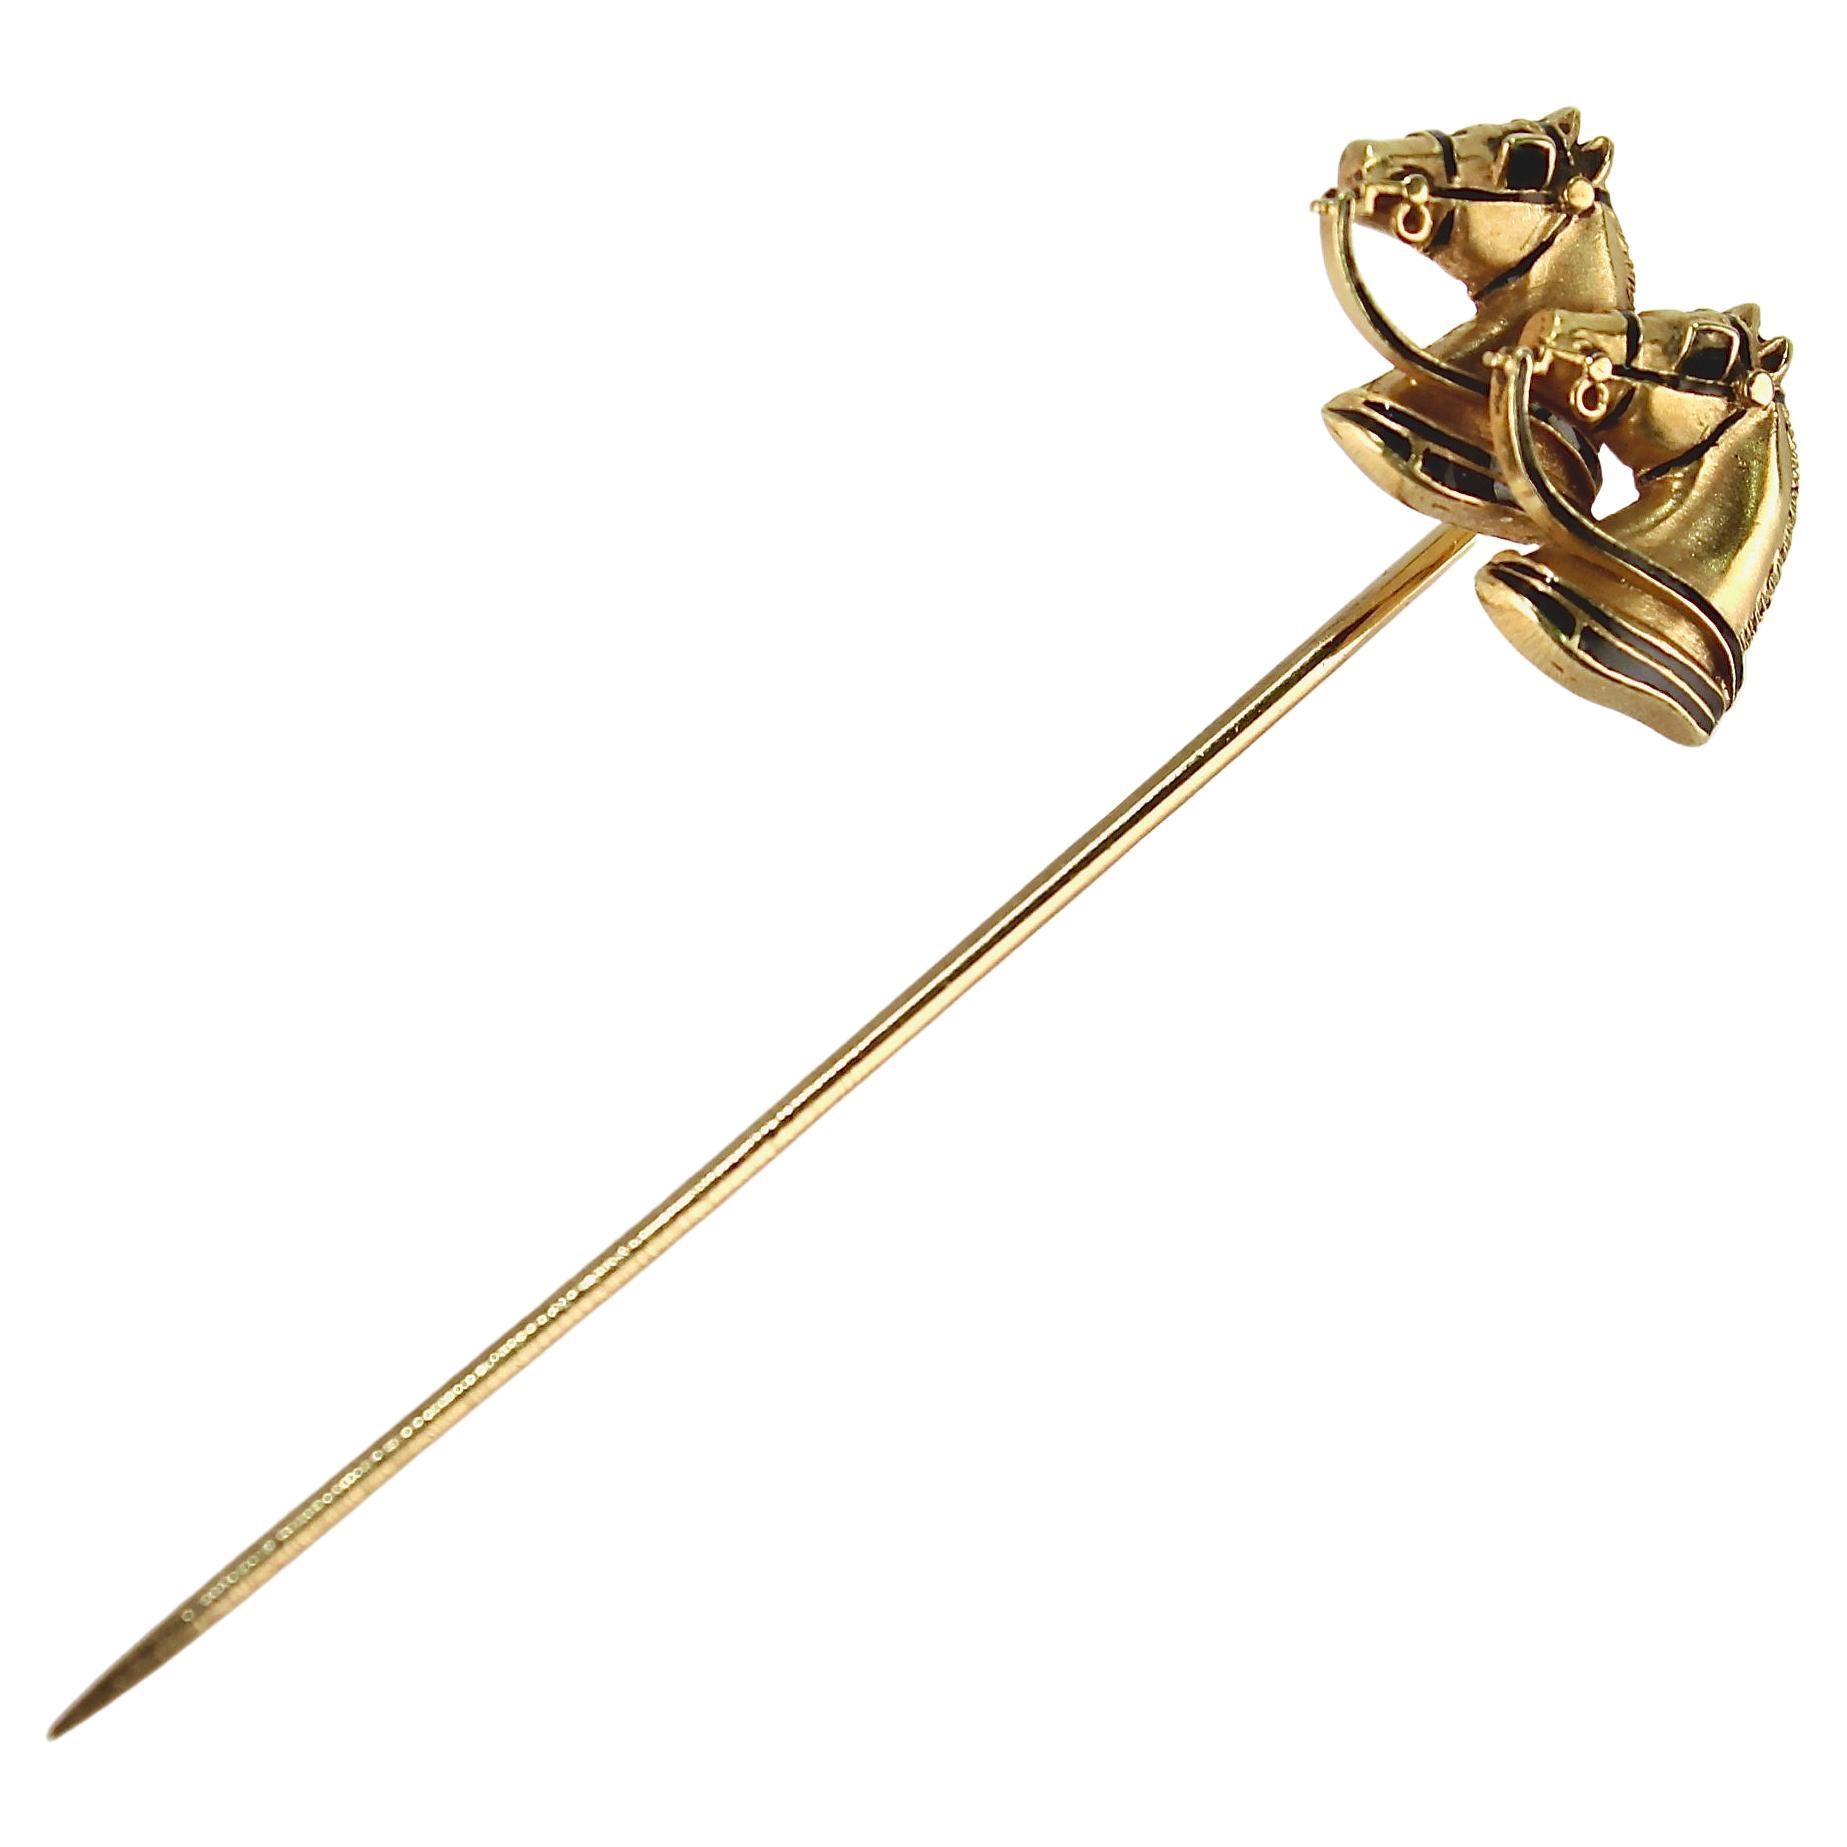 A very fine vintage equestrian stickpin. 

In the form of two 14k gold horse heads with black enamel accents in their blinders, harness and collars.

Simply a great stickpin!

Date:
Early to Mid 20th Century

Overall Condition:
It is in overall